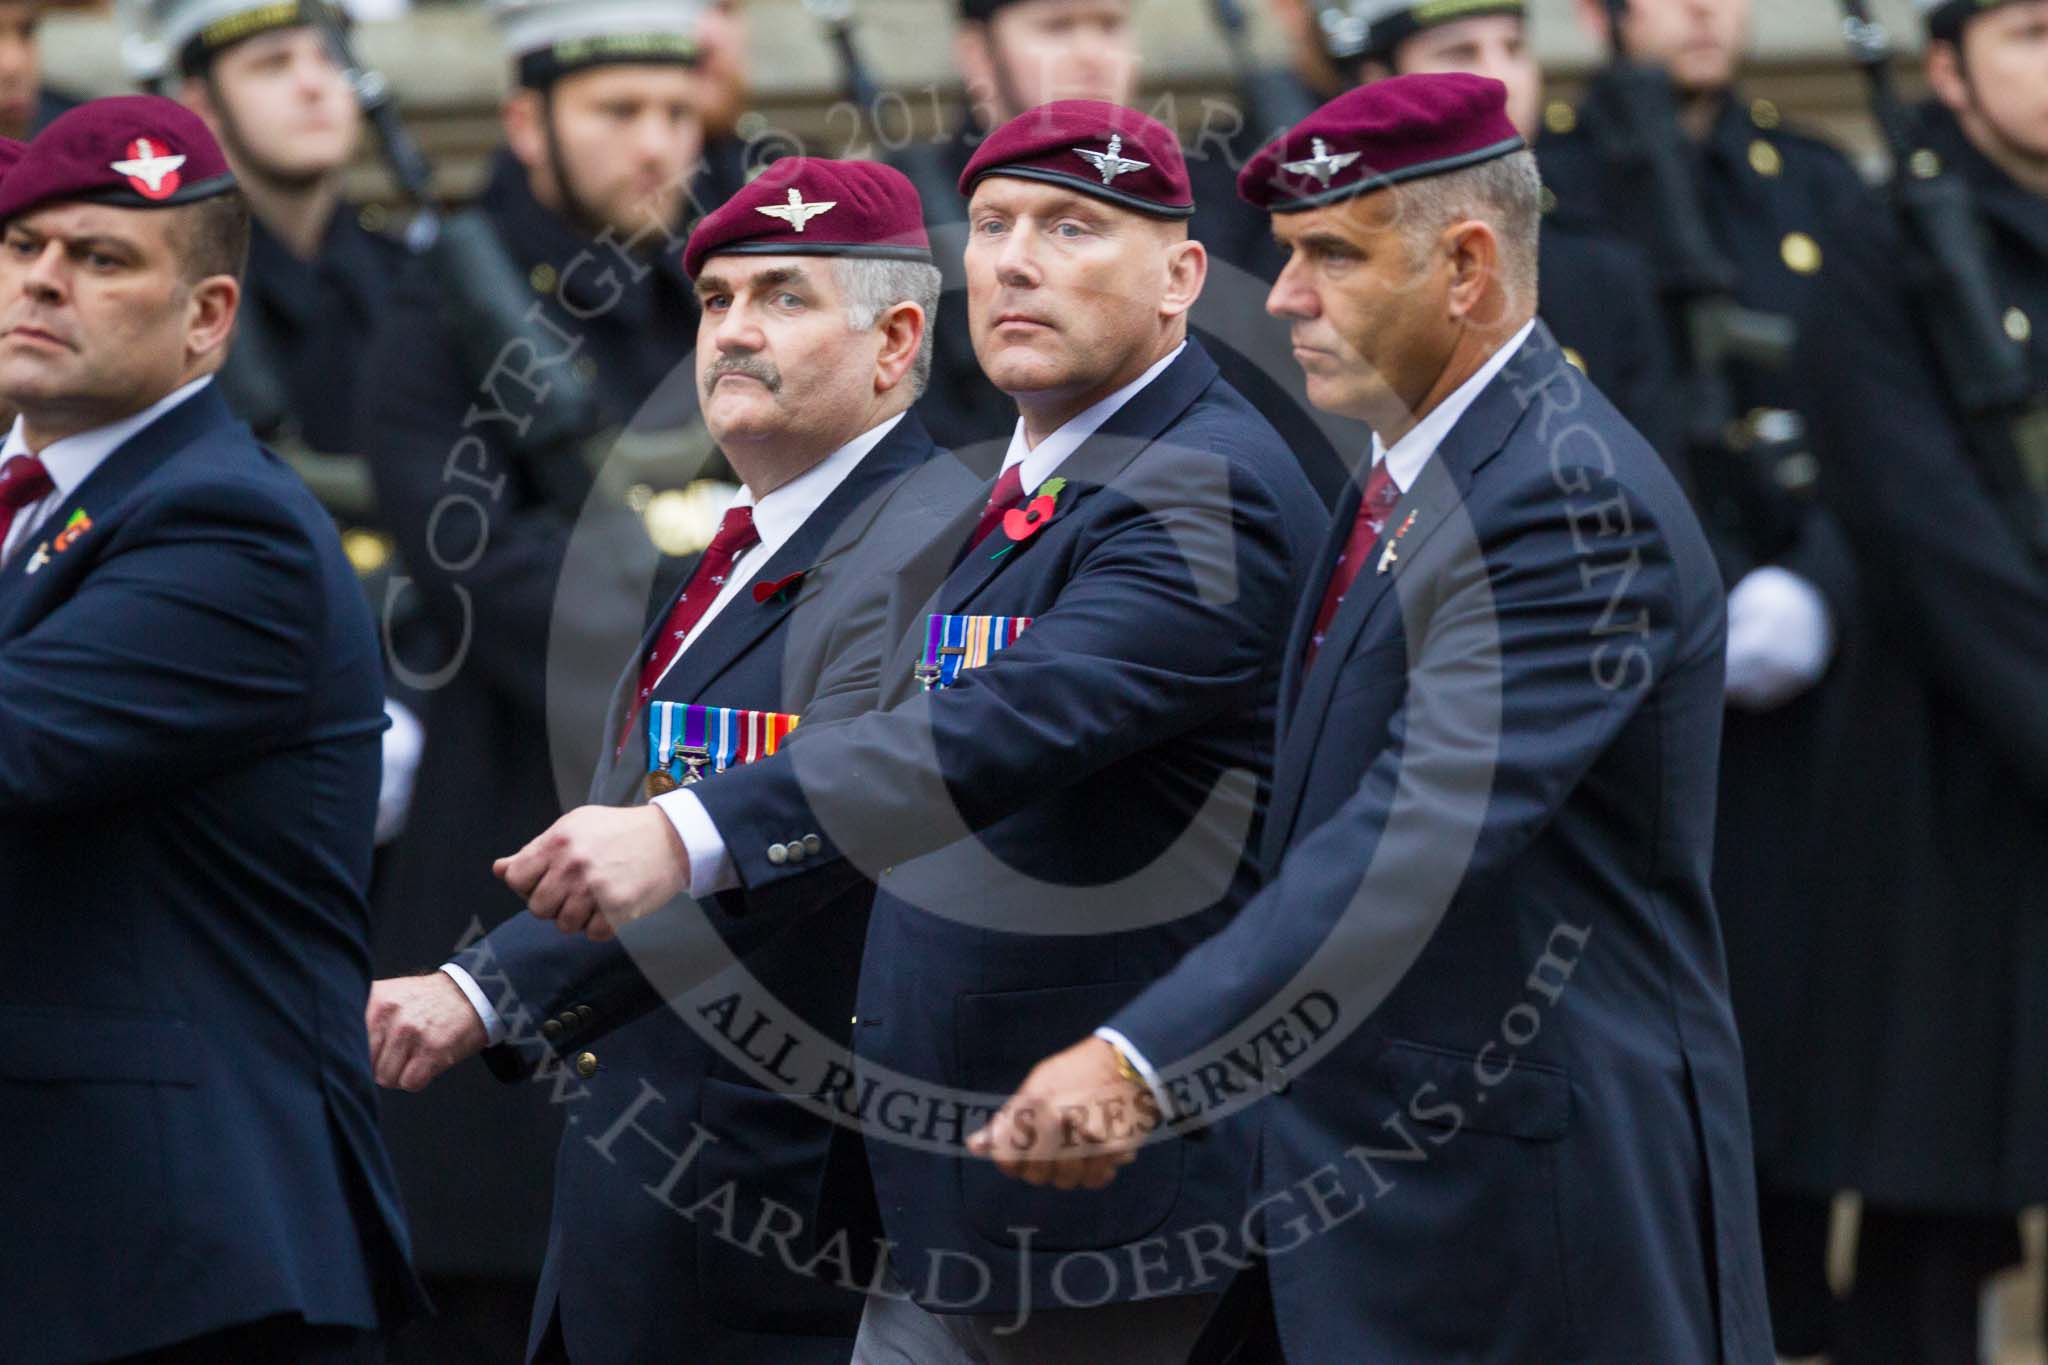 Remembrance Sunday at the Cenotaph 2015: Group A14, 4 Company Association (Parachute Regiment).
Cenotaph, Whitehall, London SW1,
London,
Greater London,
United Kingdom,
on 08 November 2015 at 12:11, image #1291